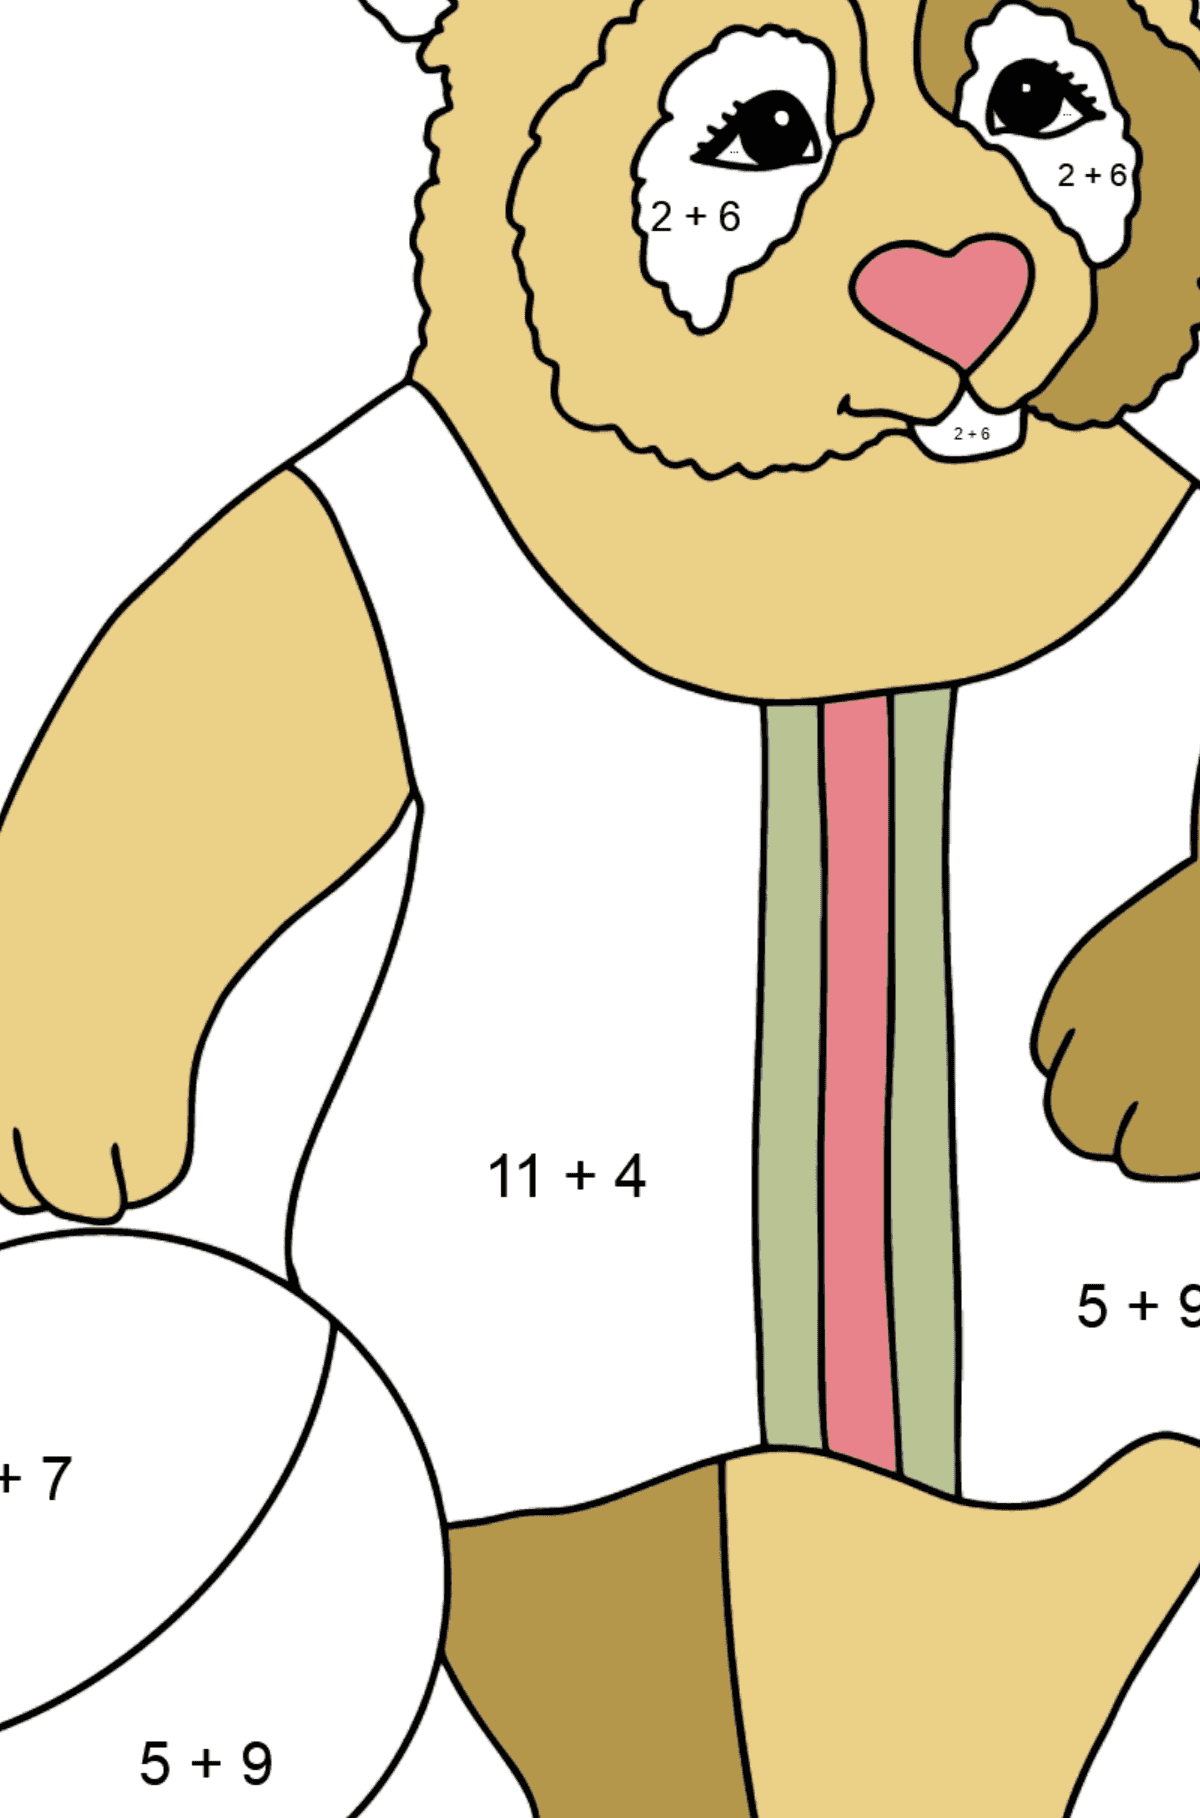 Coloring Picture - A Panda is Playing on a Beach - Math Coloring - Addition for Kids